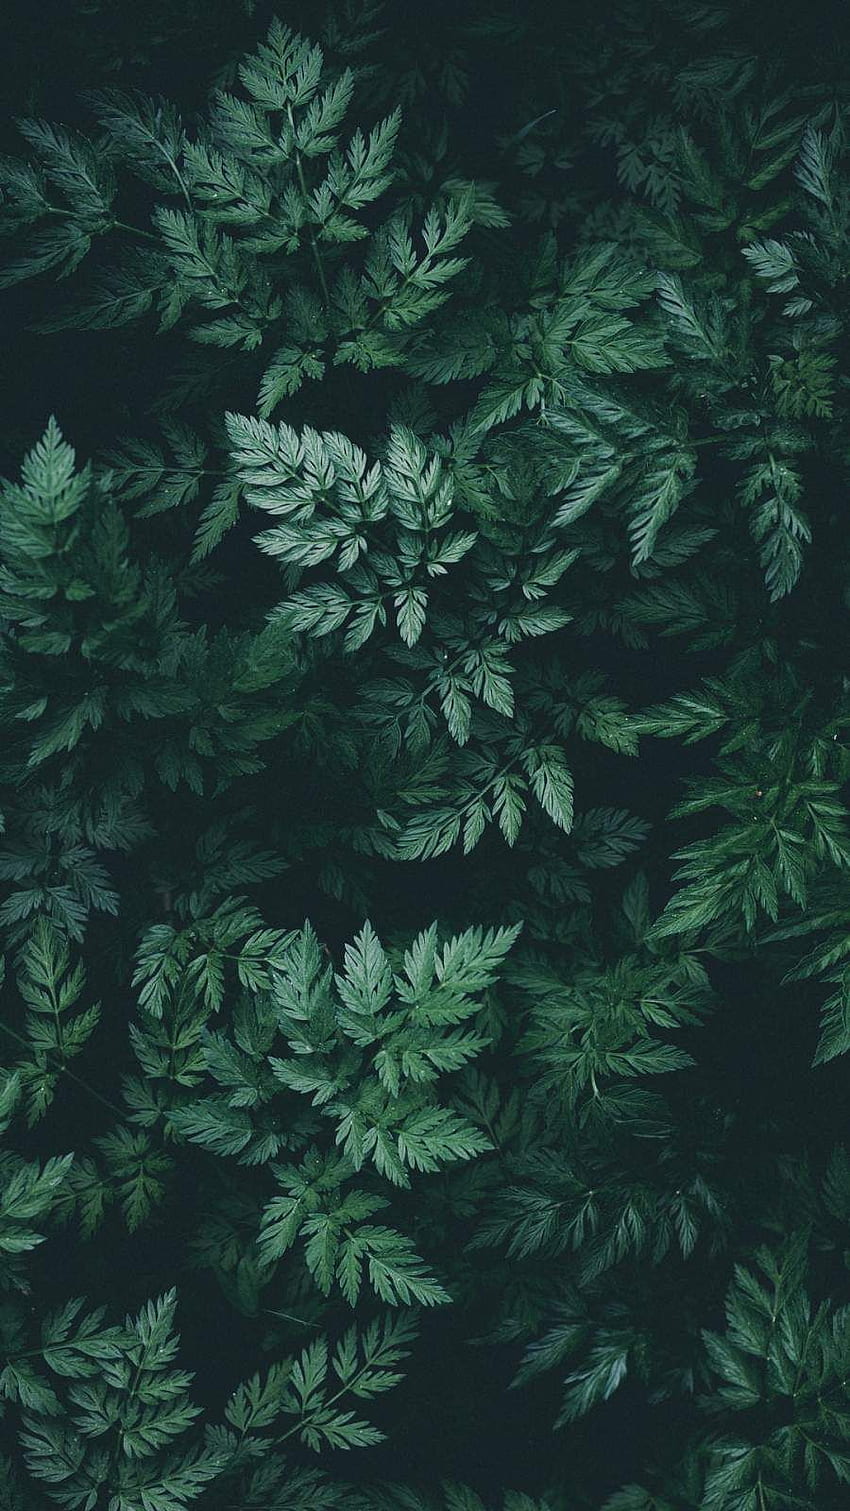 Green iPhone 11 users this wallpaper looks tremendous with it  highly  recommend  riPhone11